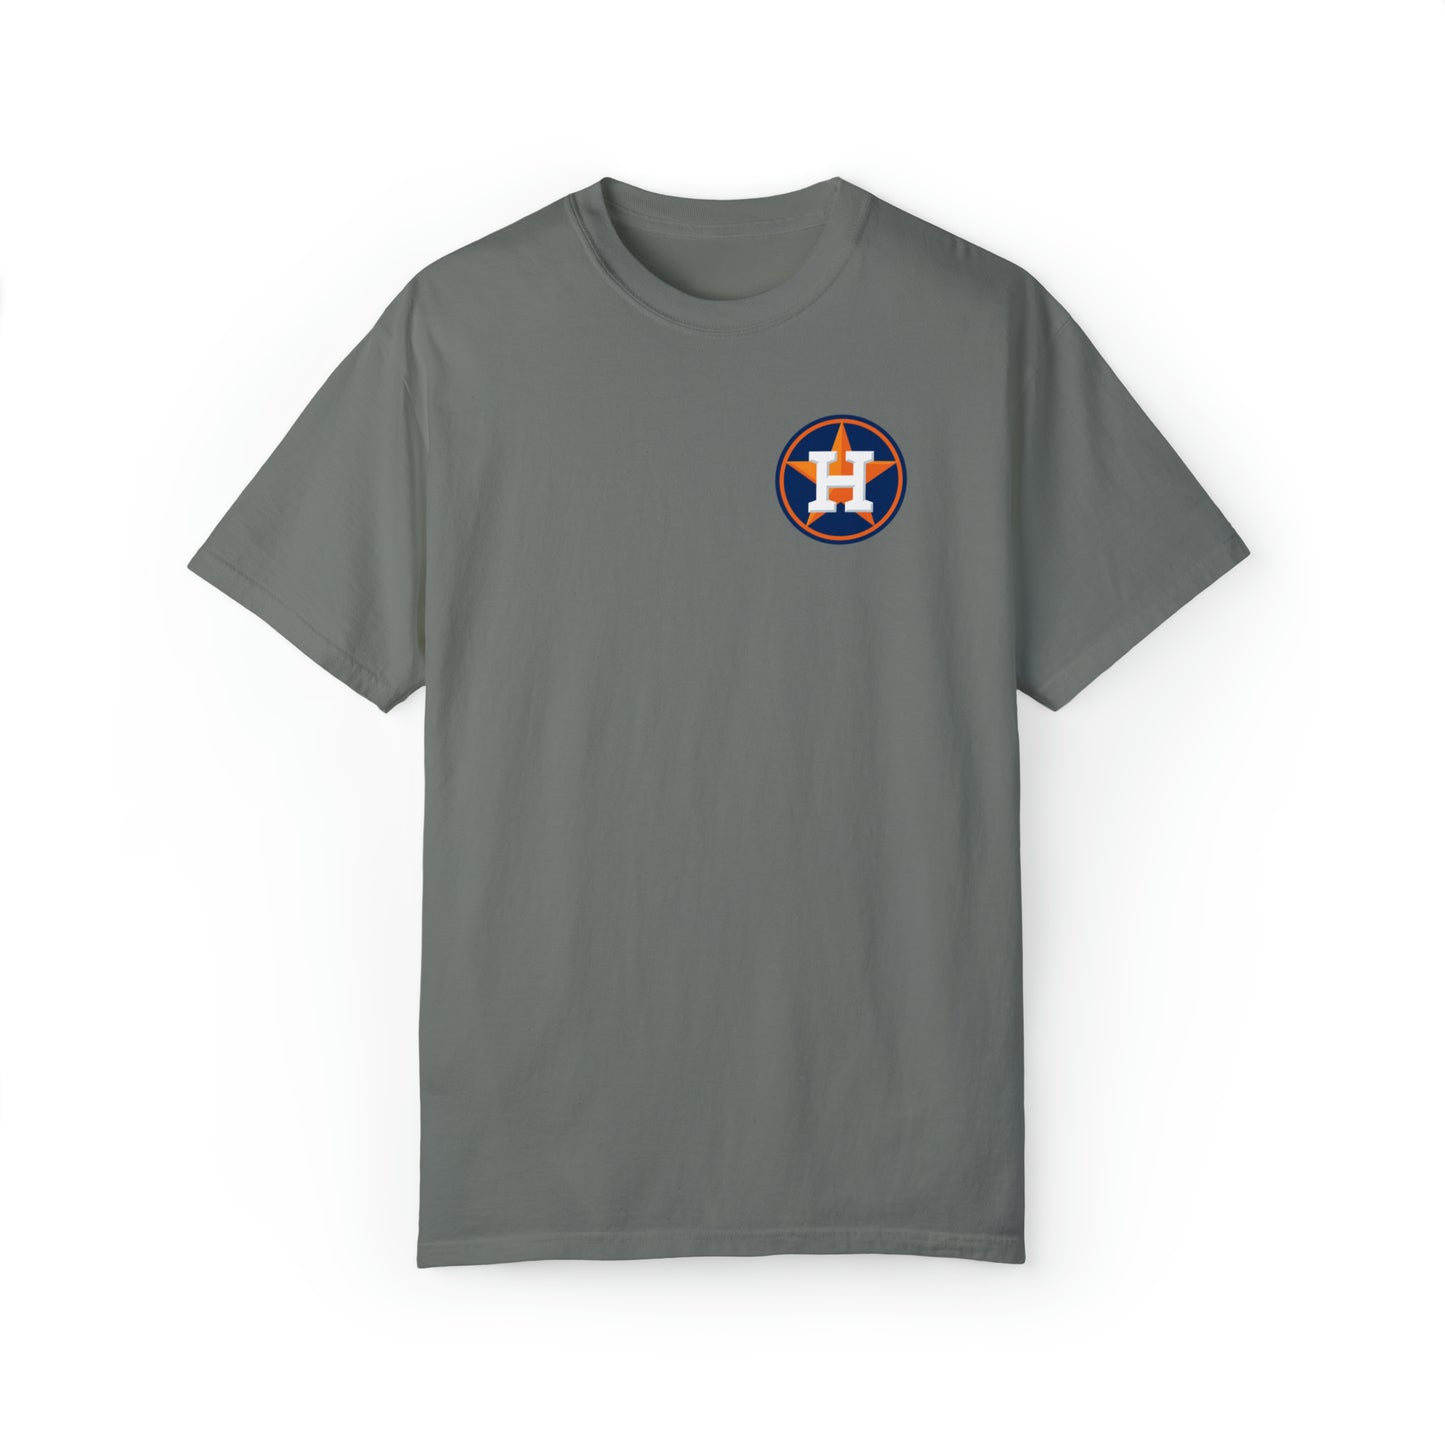 Astros Game Day Shirt